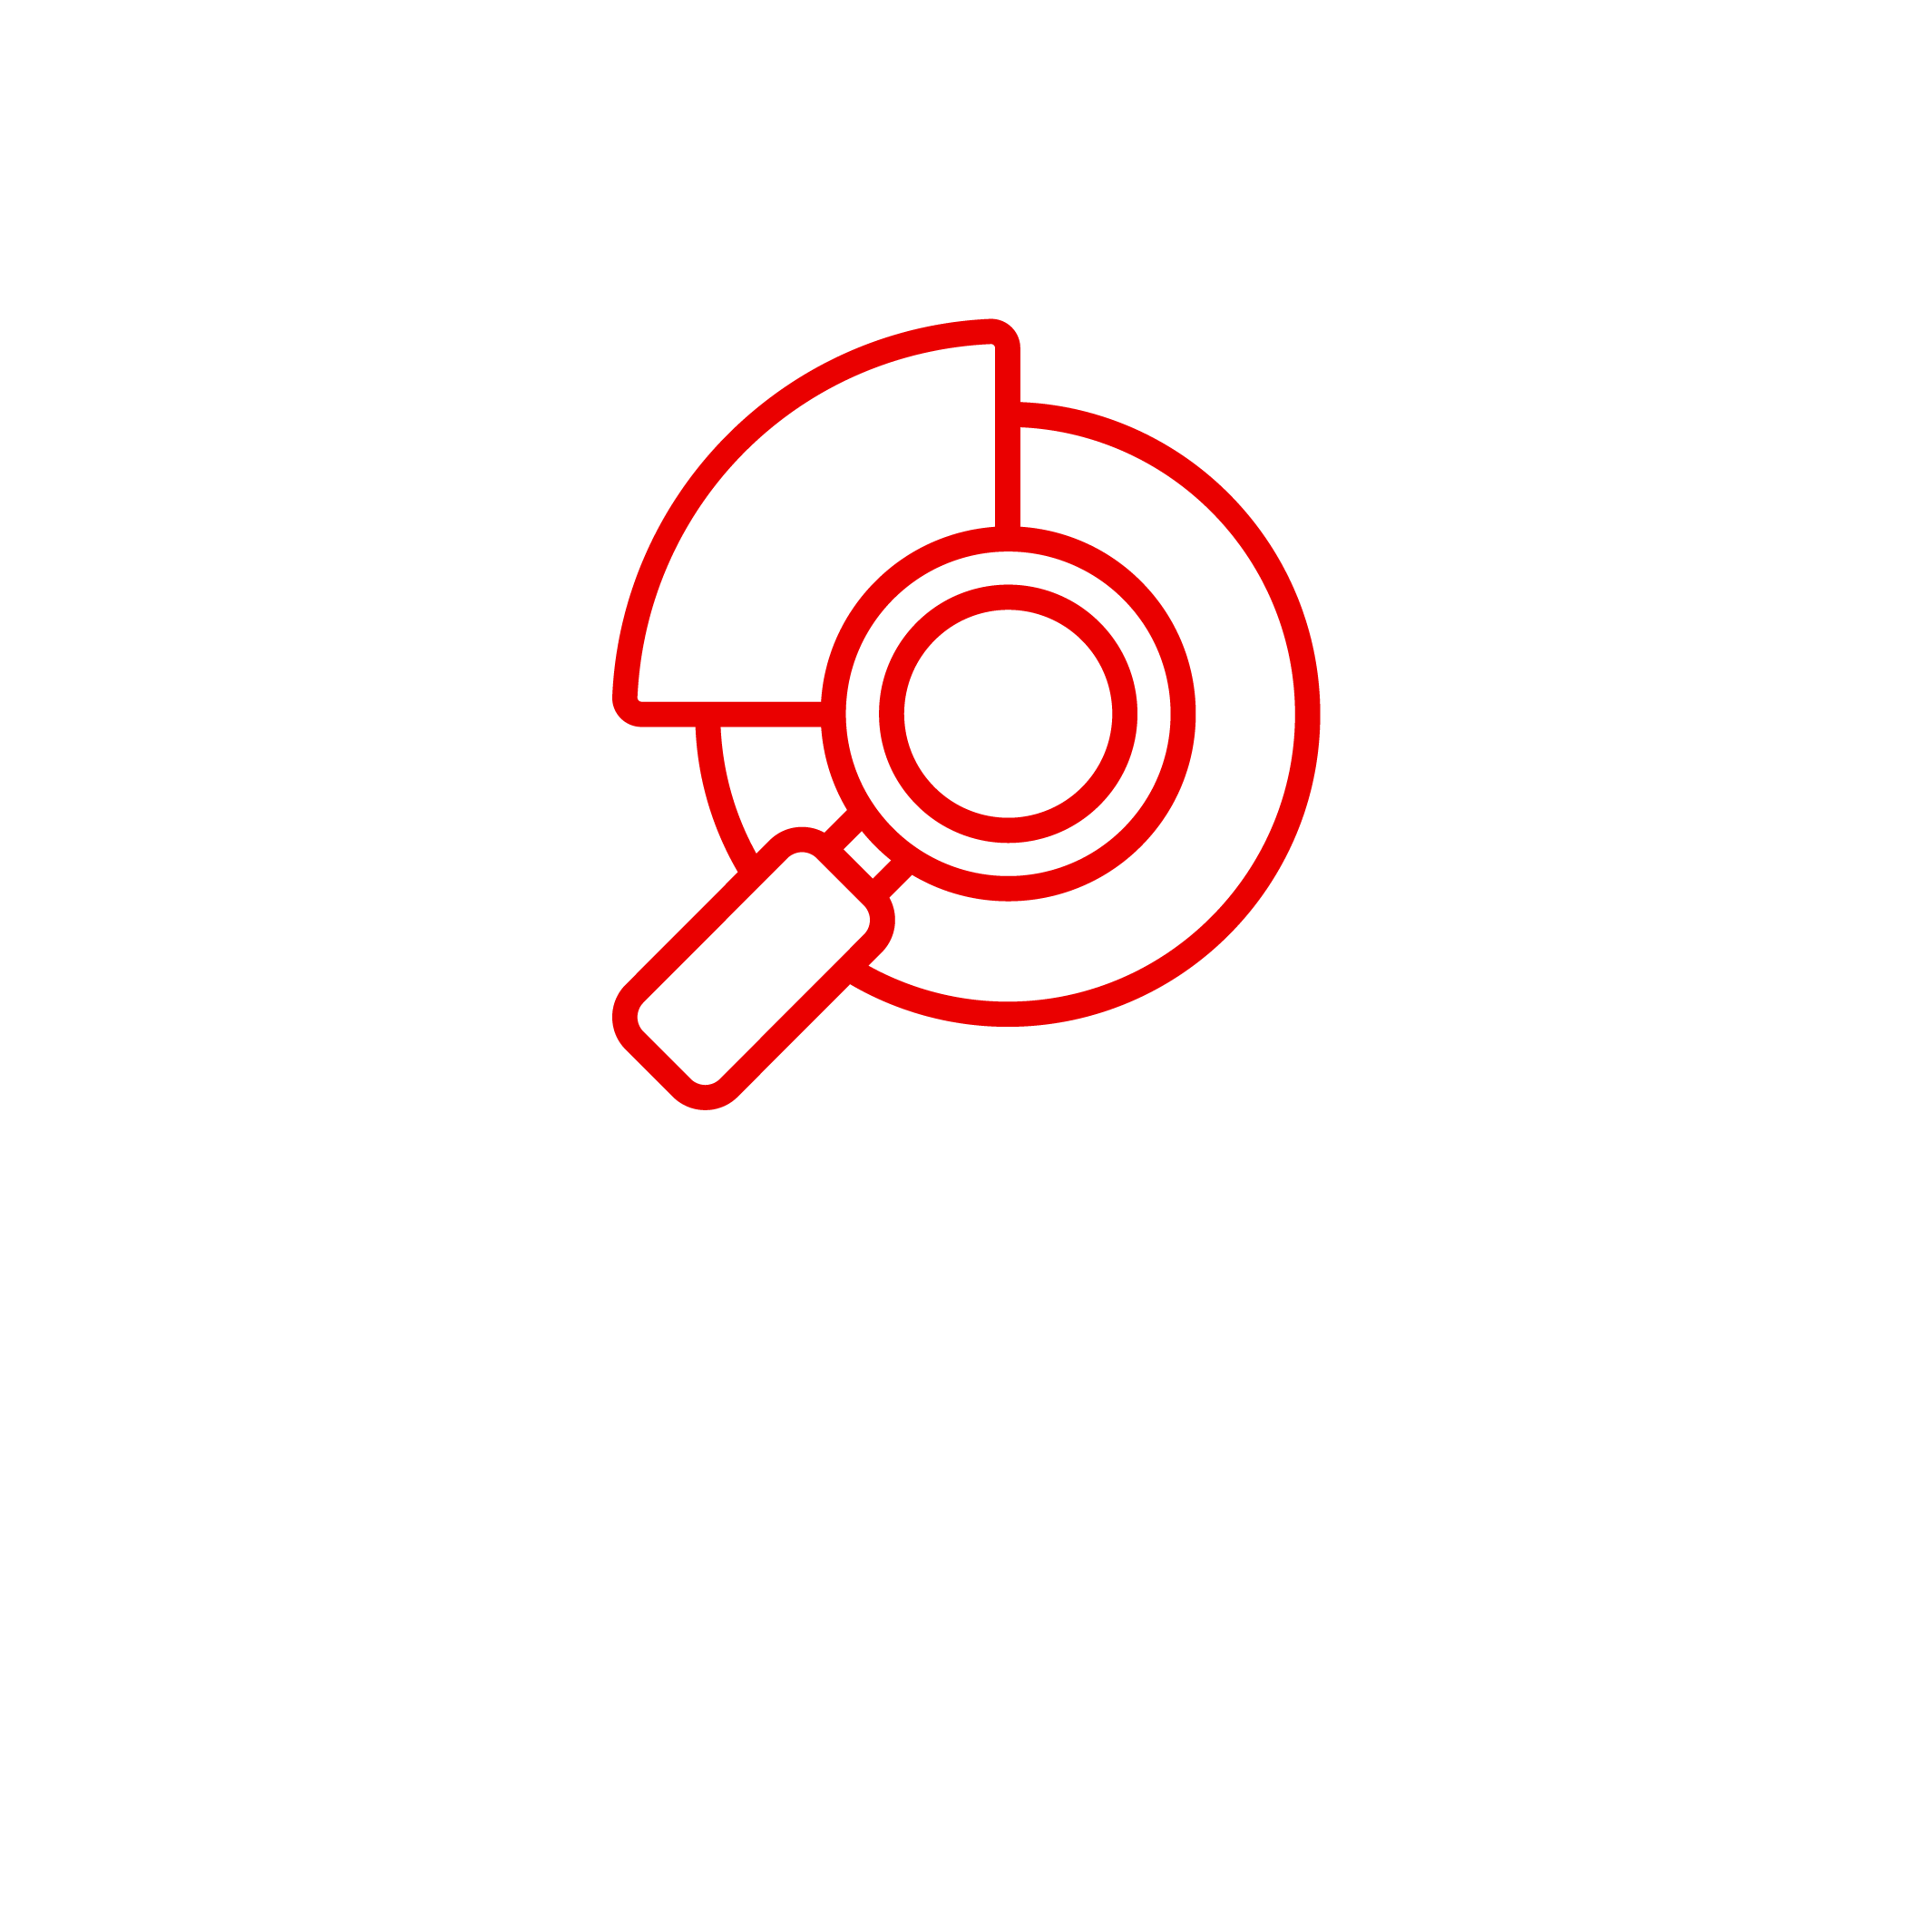 audience research